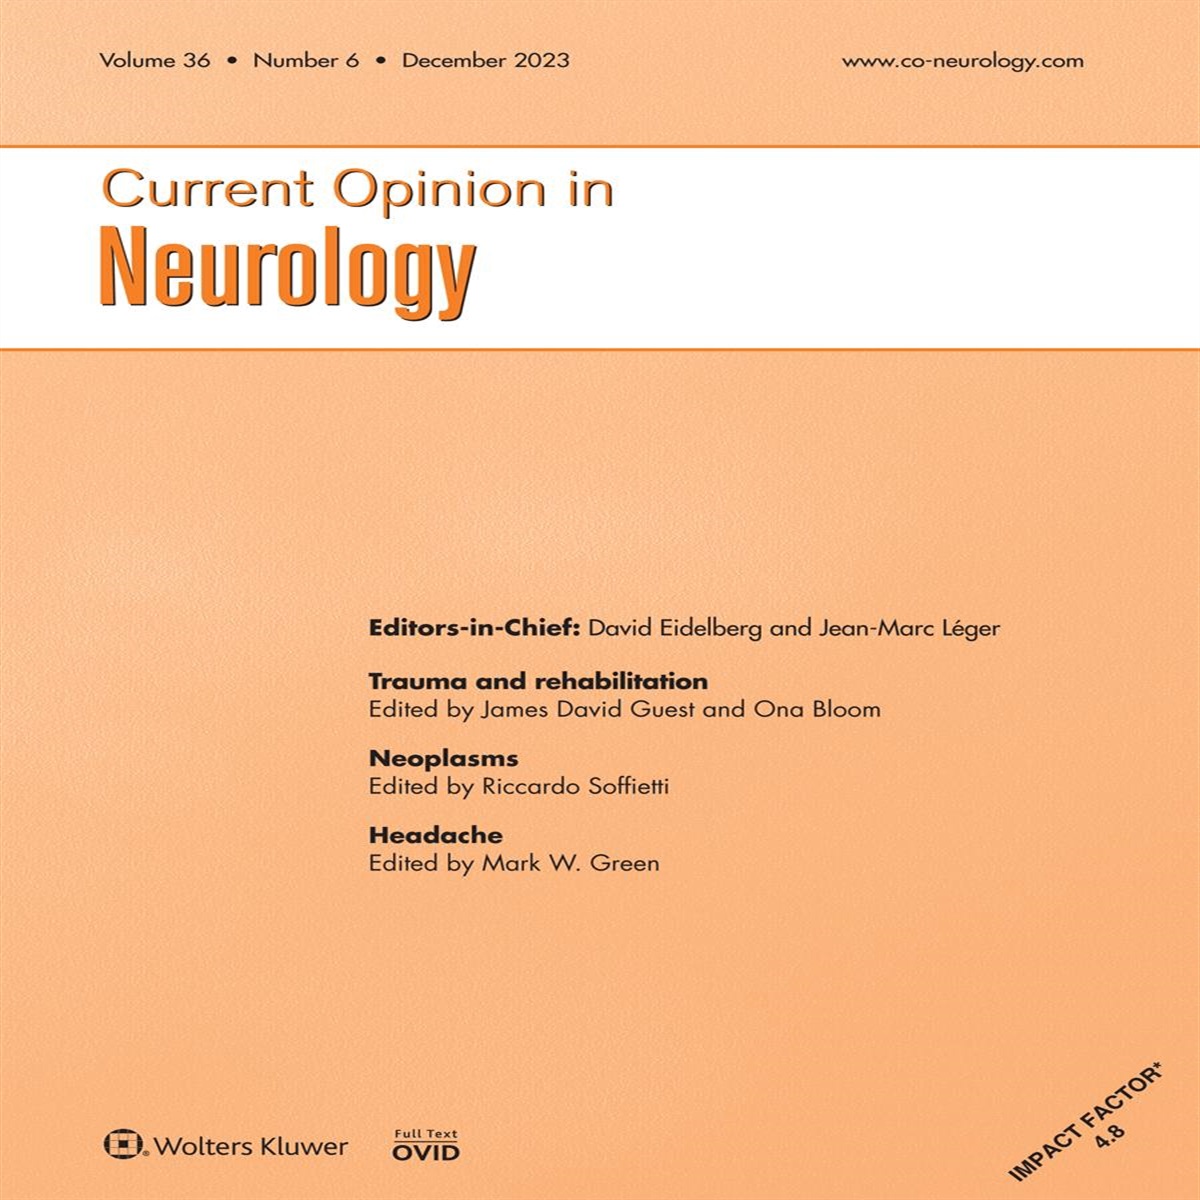 Editorial: Advances in basic science and technology are bringing new flavor in neuro-oncology